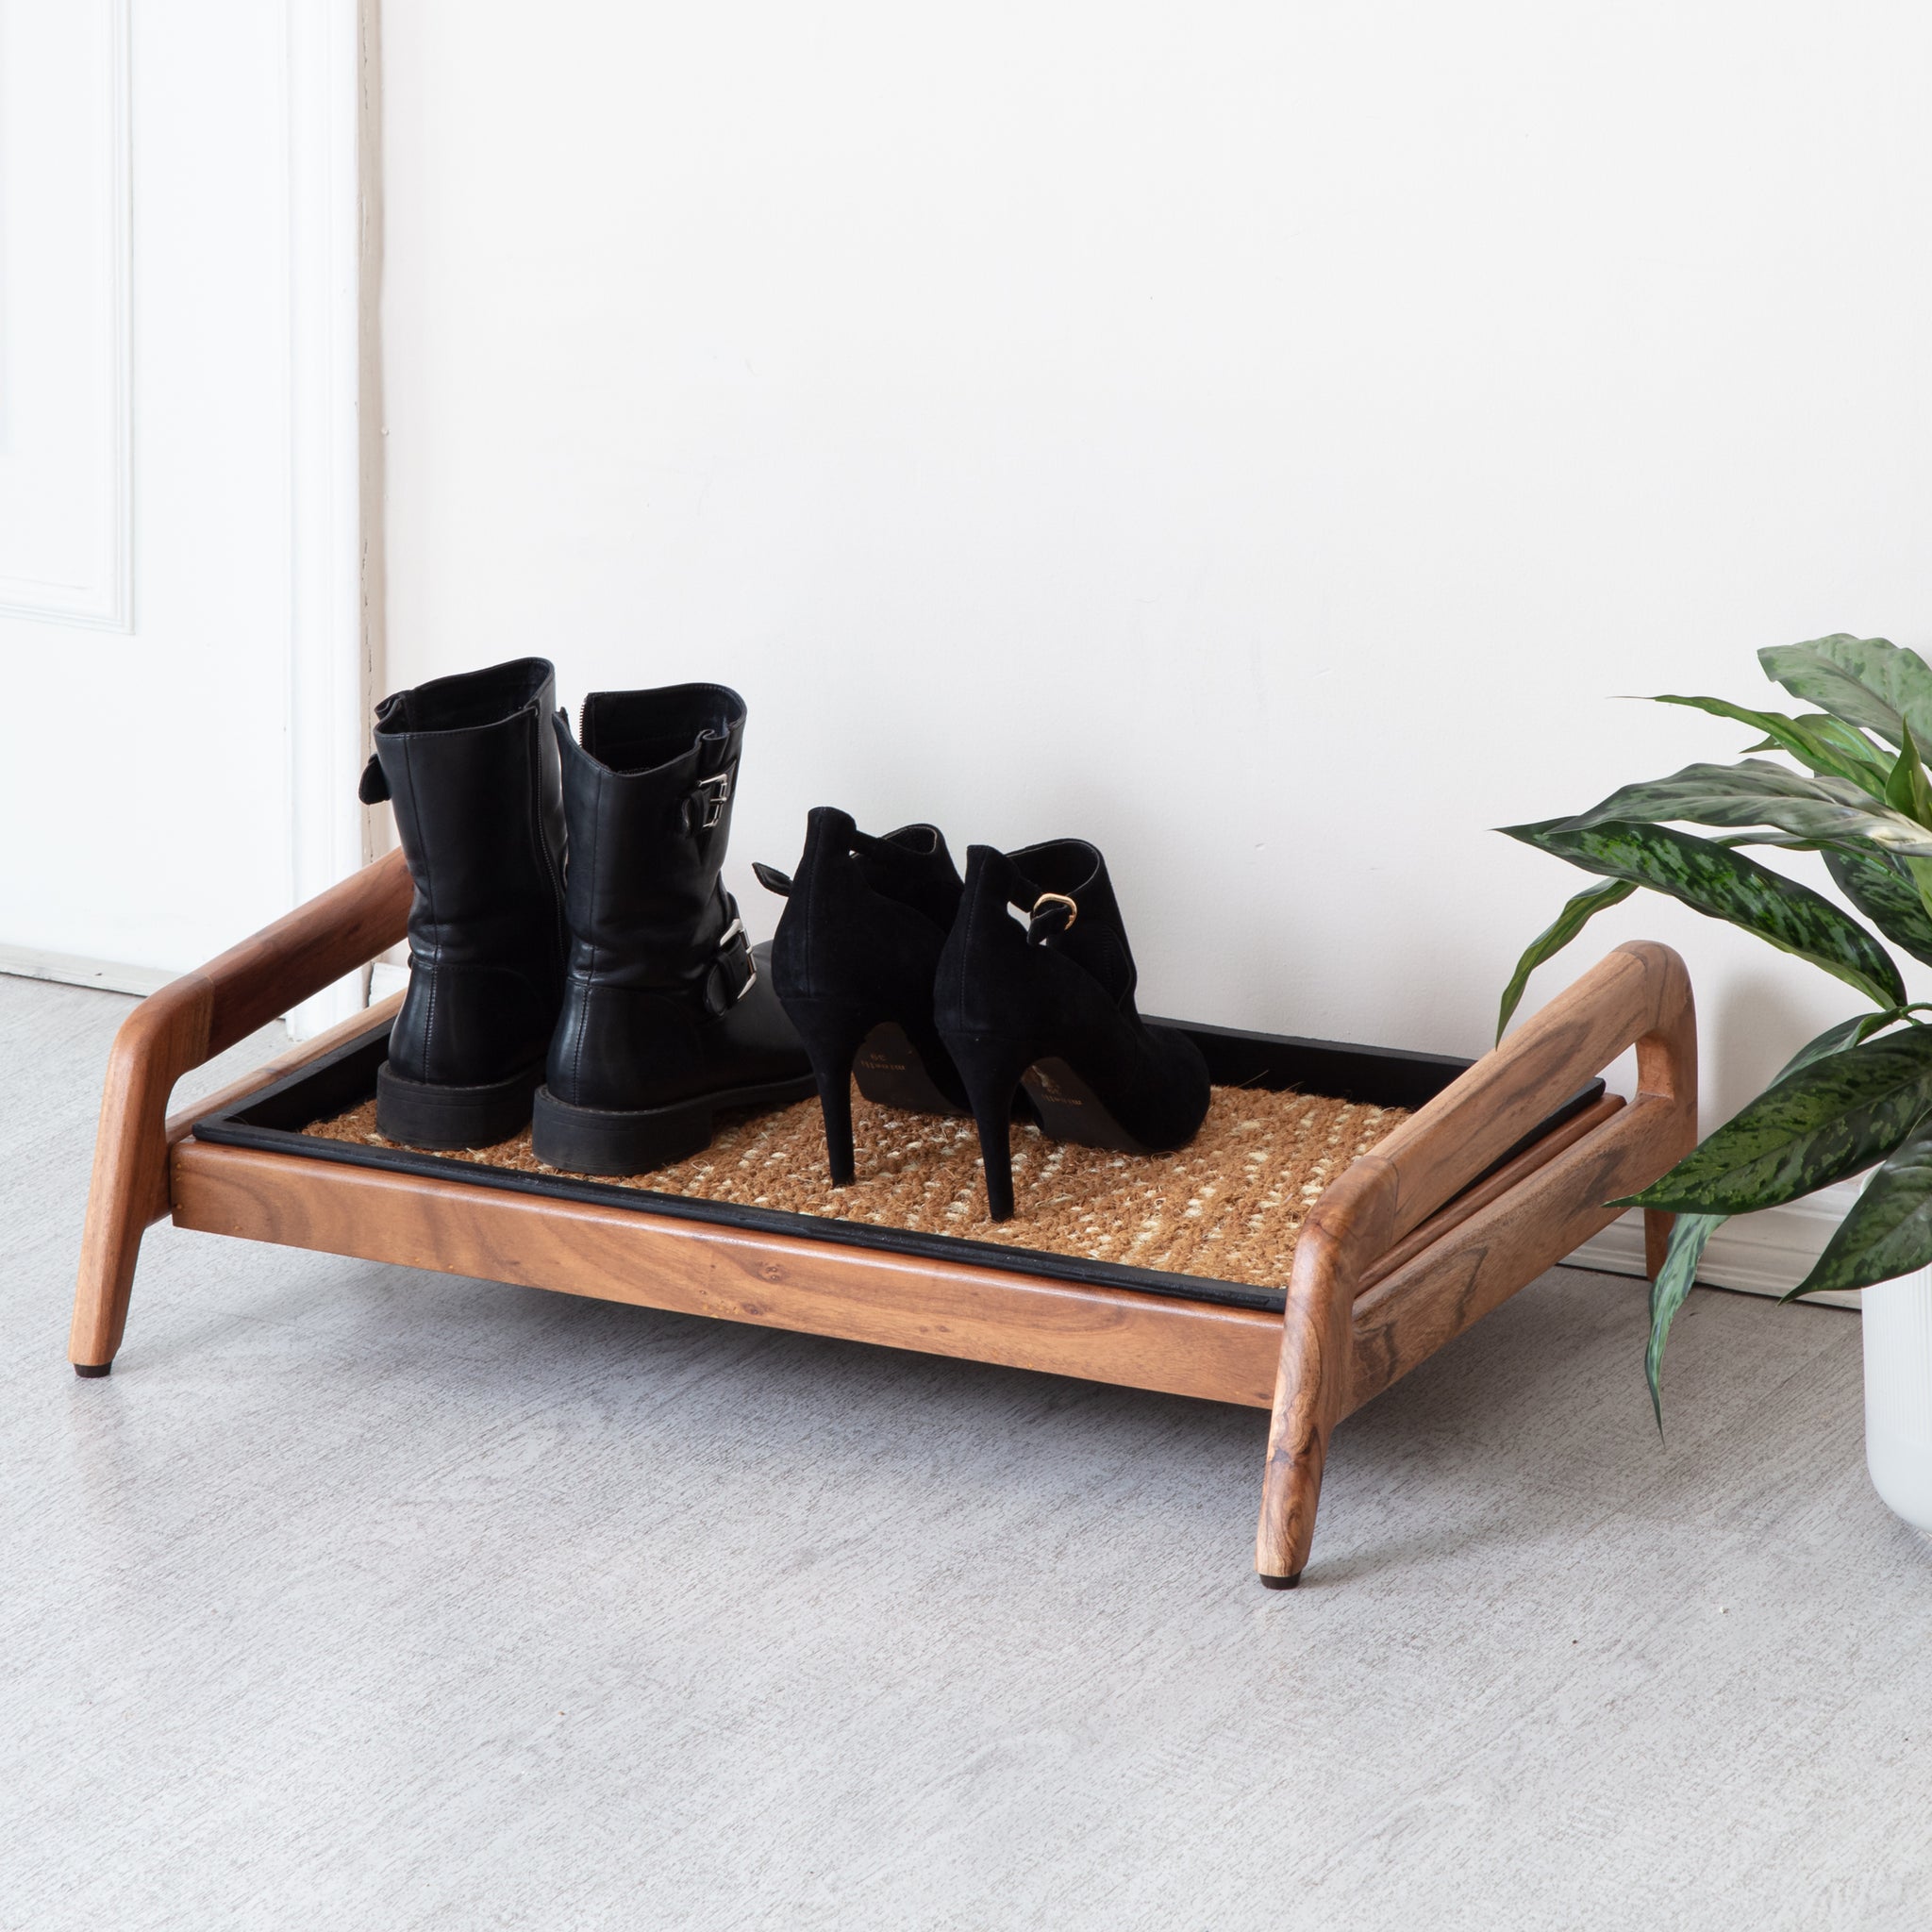 Anji Mountain Wooden Boot/Shoe Tray Stand with Coir Insert, 2 Tier, Fits 4  Pair (26.5 L x 22 W x15 H), Natural